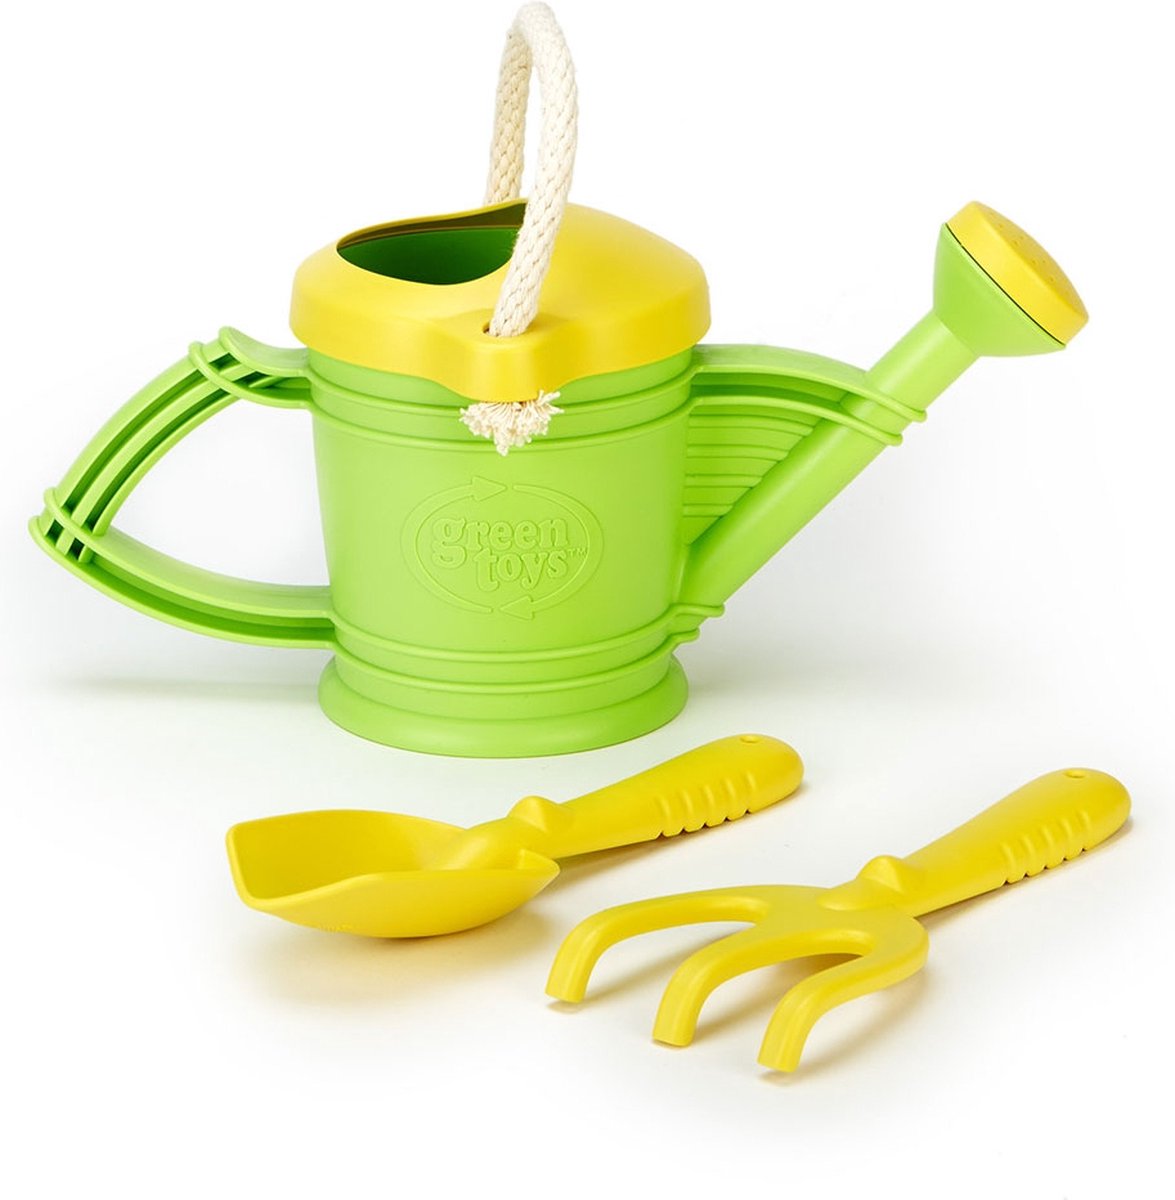 Green Toys Watering Can (Green) - Green Toys Inc